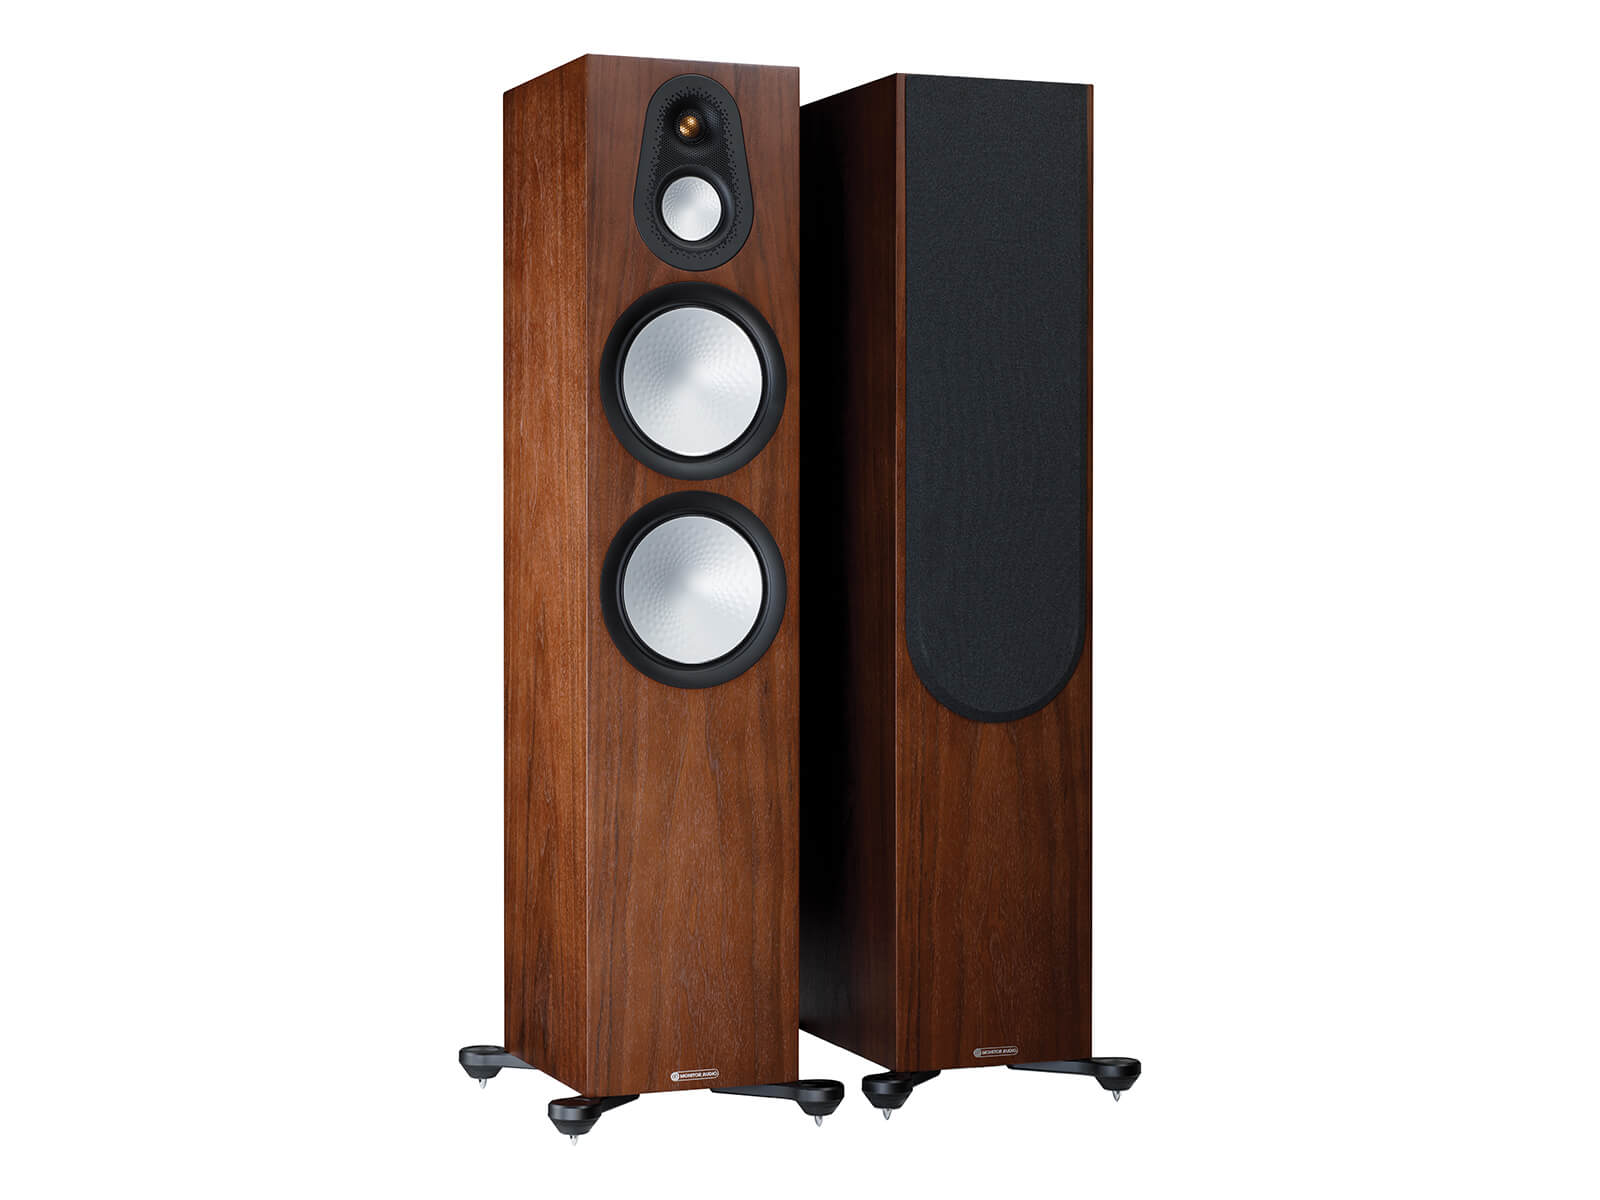 A pair of Monitor Audio's Silver 500 7G, in a natural walnut finish, iso view, with and without grilles.